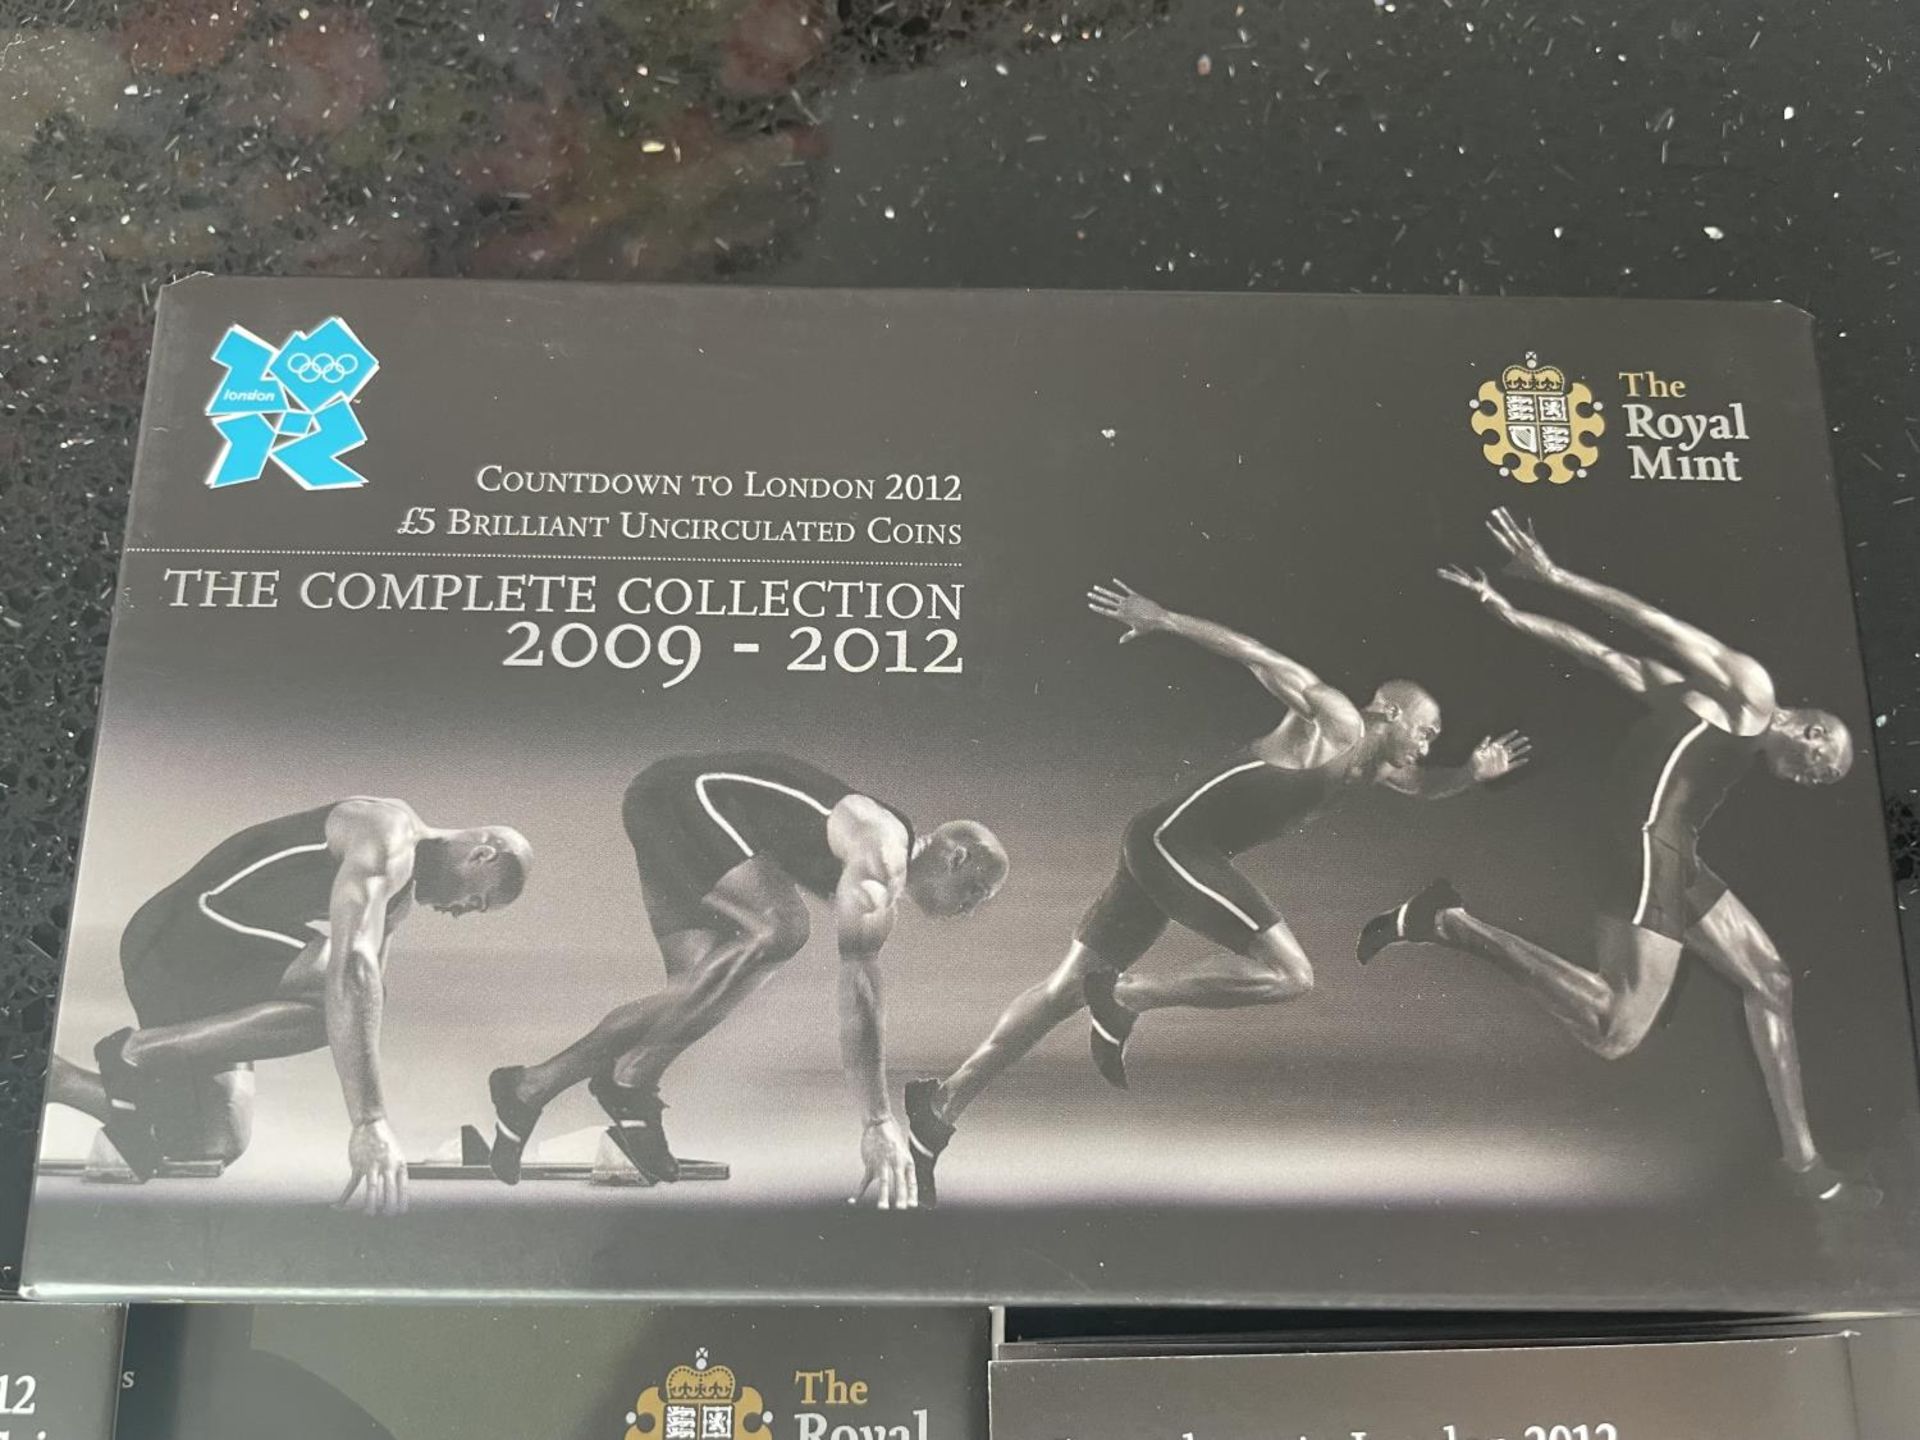 THE COMPLETE COLLECTION “COUNTDOWN LONDON 2012” 4 X £5 BRILLIANT, UNCIRCULATED COINS - Image 2 of 8